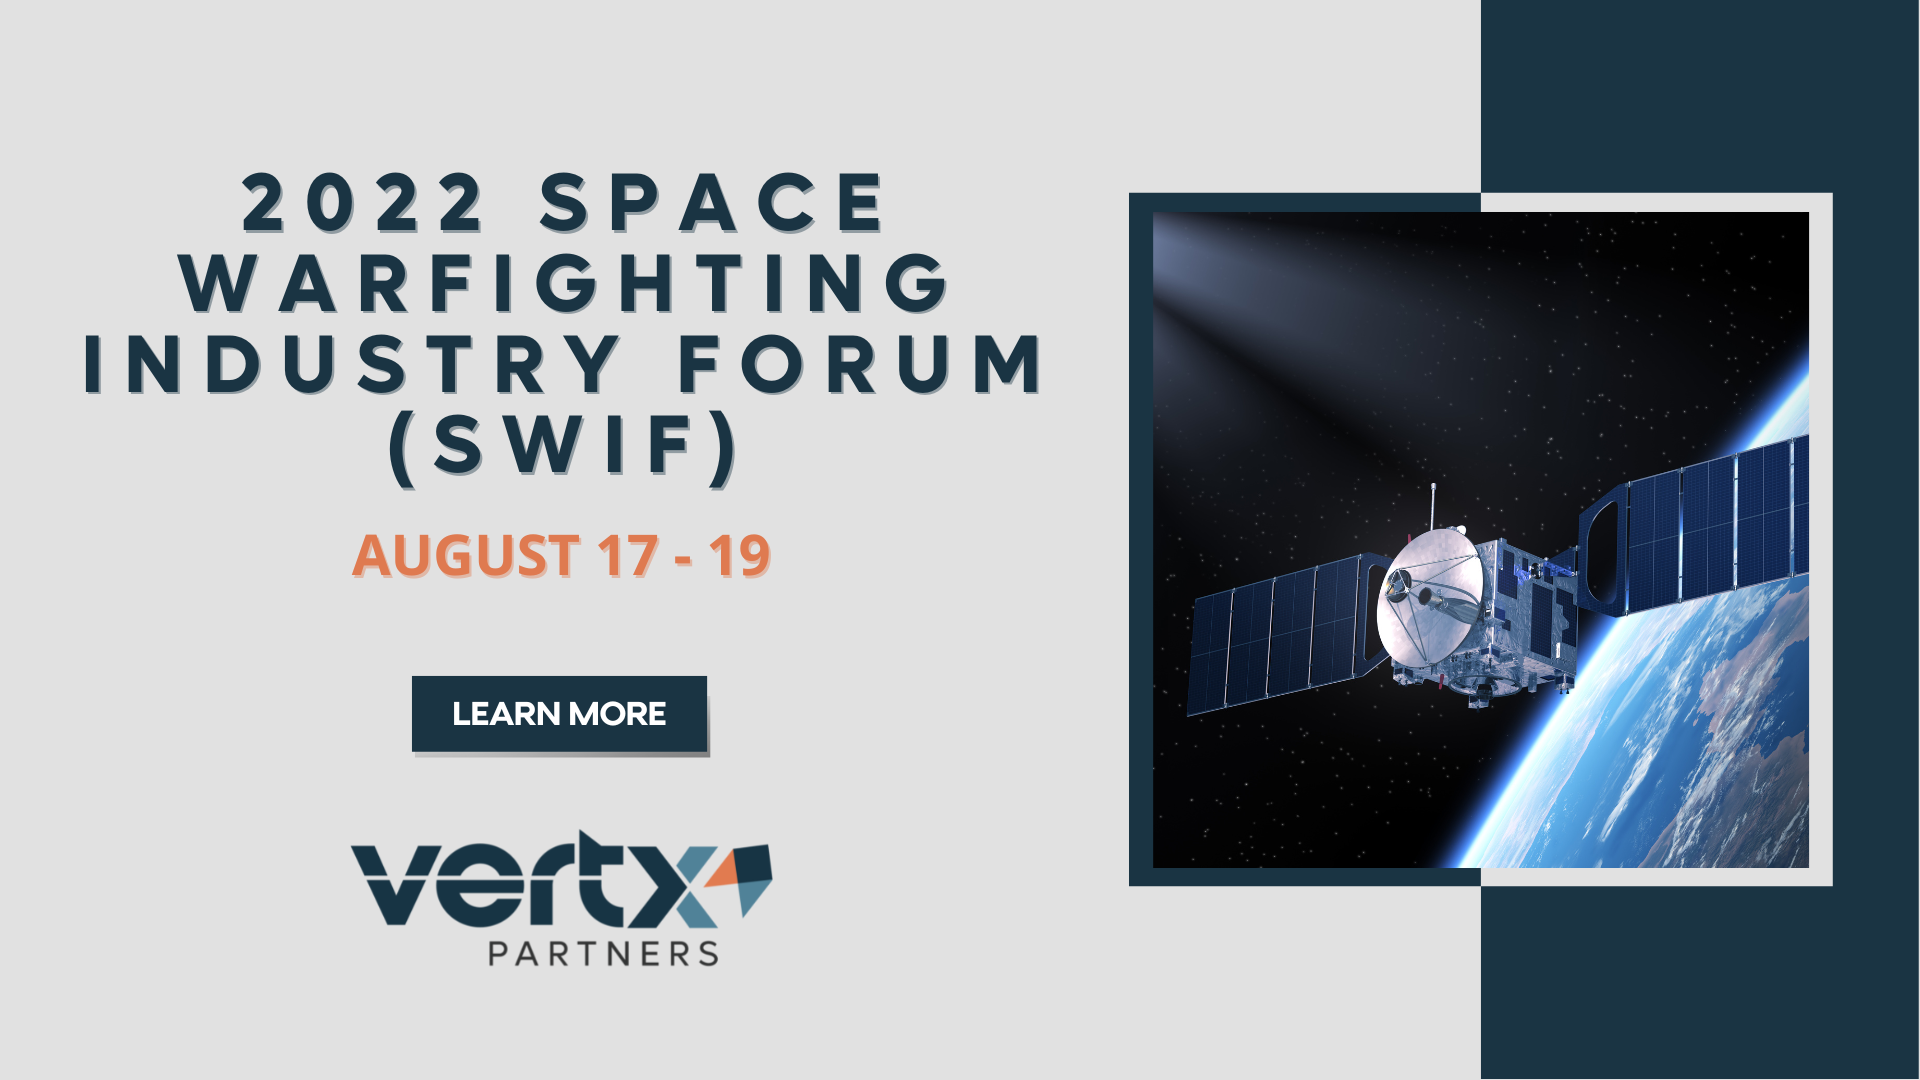 This graphic contains the title 2022 space warfighting industry forum (SWIF) with the date underneath august 17th through the 19th, there is an image to the right with a satellite in space with earth behind it.